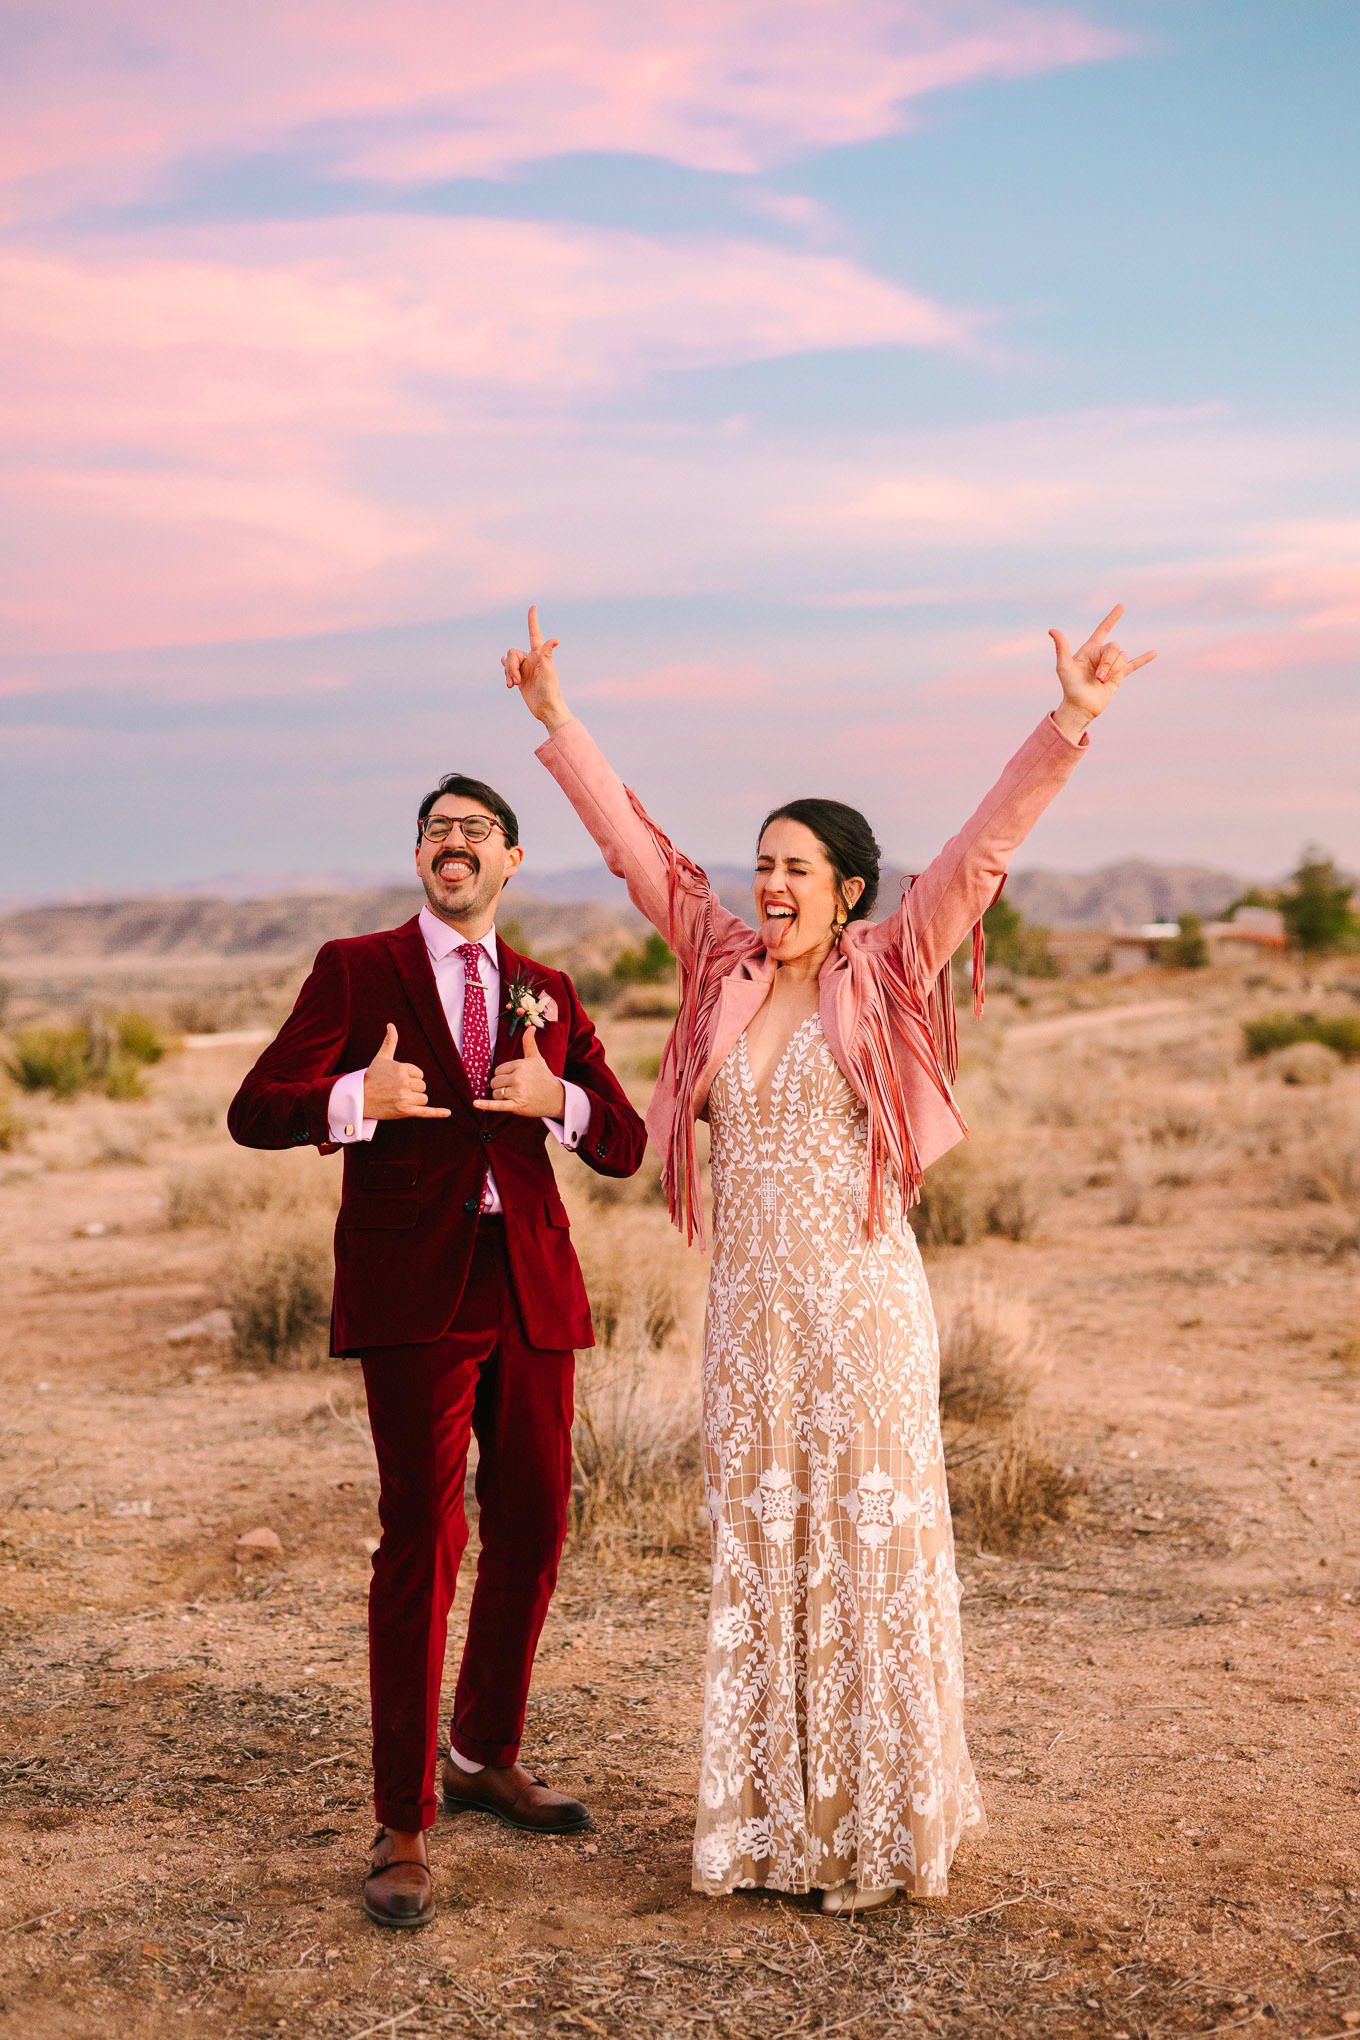 Rimrock Ranch wedding in Pioneertown | Wedding and elopement photography roundup | Los Angeles and Palm Springs  photographer | #losangeleswedding #palmspringswedding #elopementphotographer

Source: Mary Costa Photography | Los Angeles